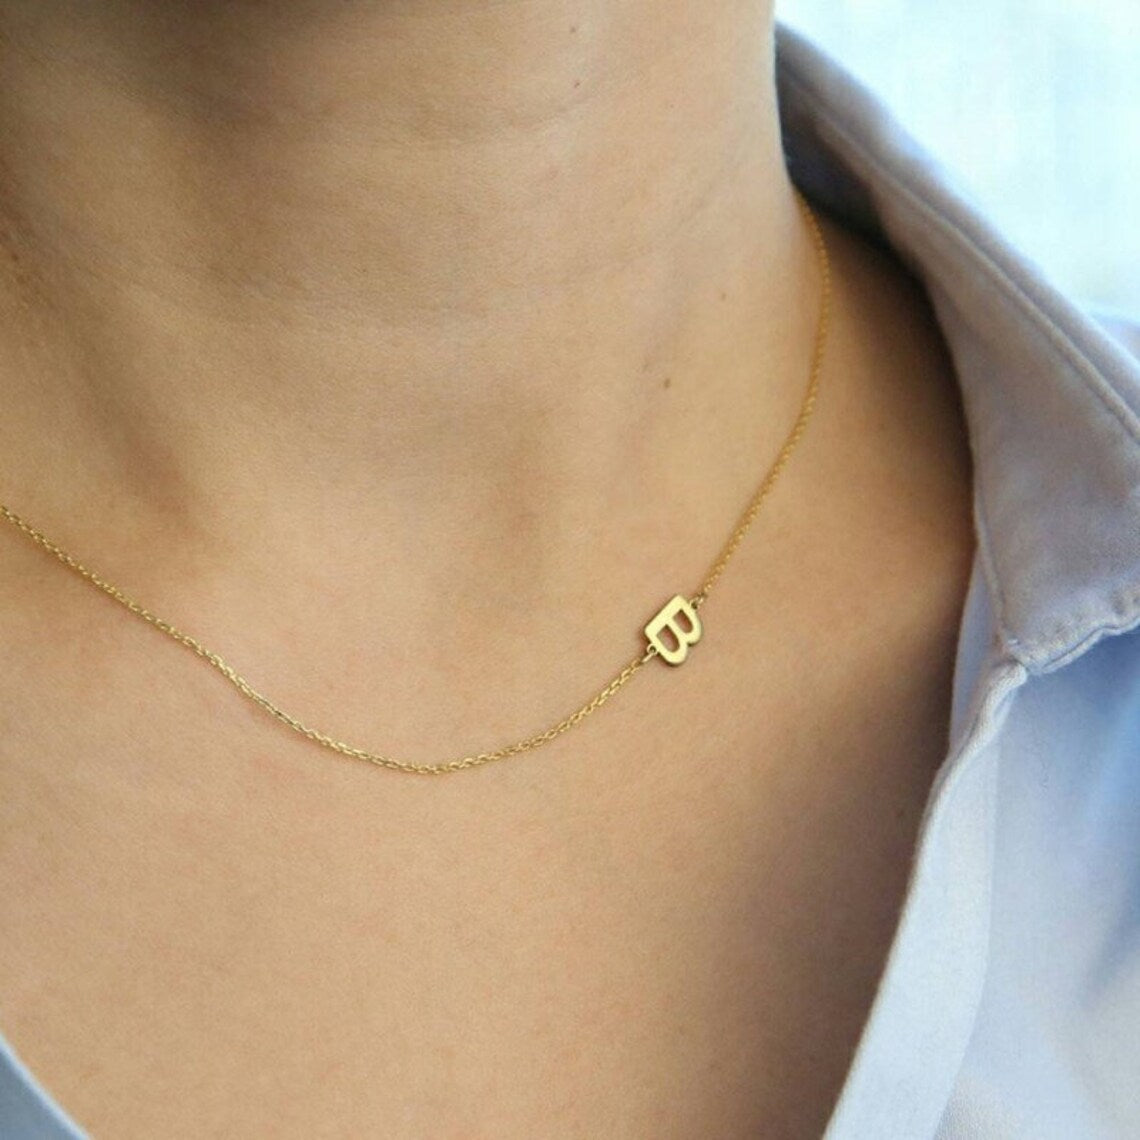 Amazon.com: Personalized 14k Gold Sideways Diamond Initial Necklace -  Custom Pave Diamond Letter Charm - Ideal Gift for Her, Christmas, Mother's  Day - Elegant Gold Jewelry : Handmade Products